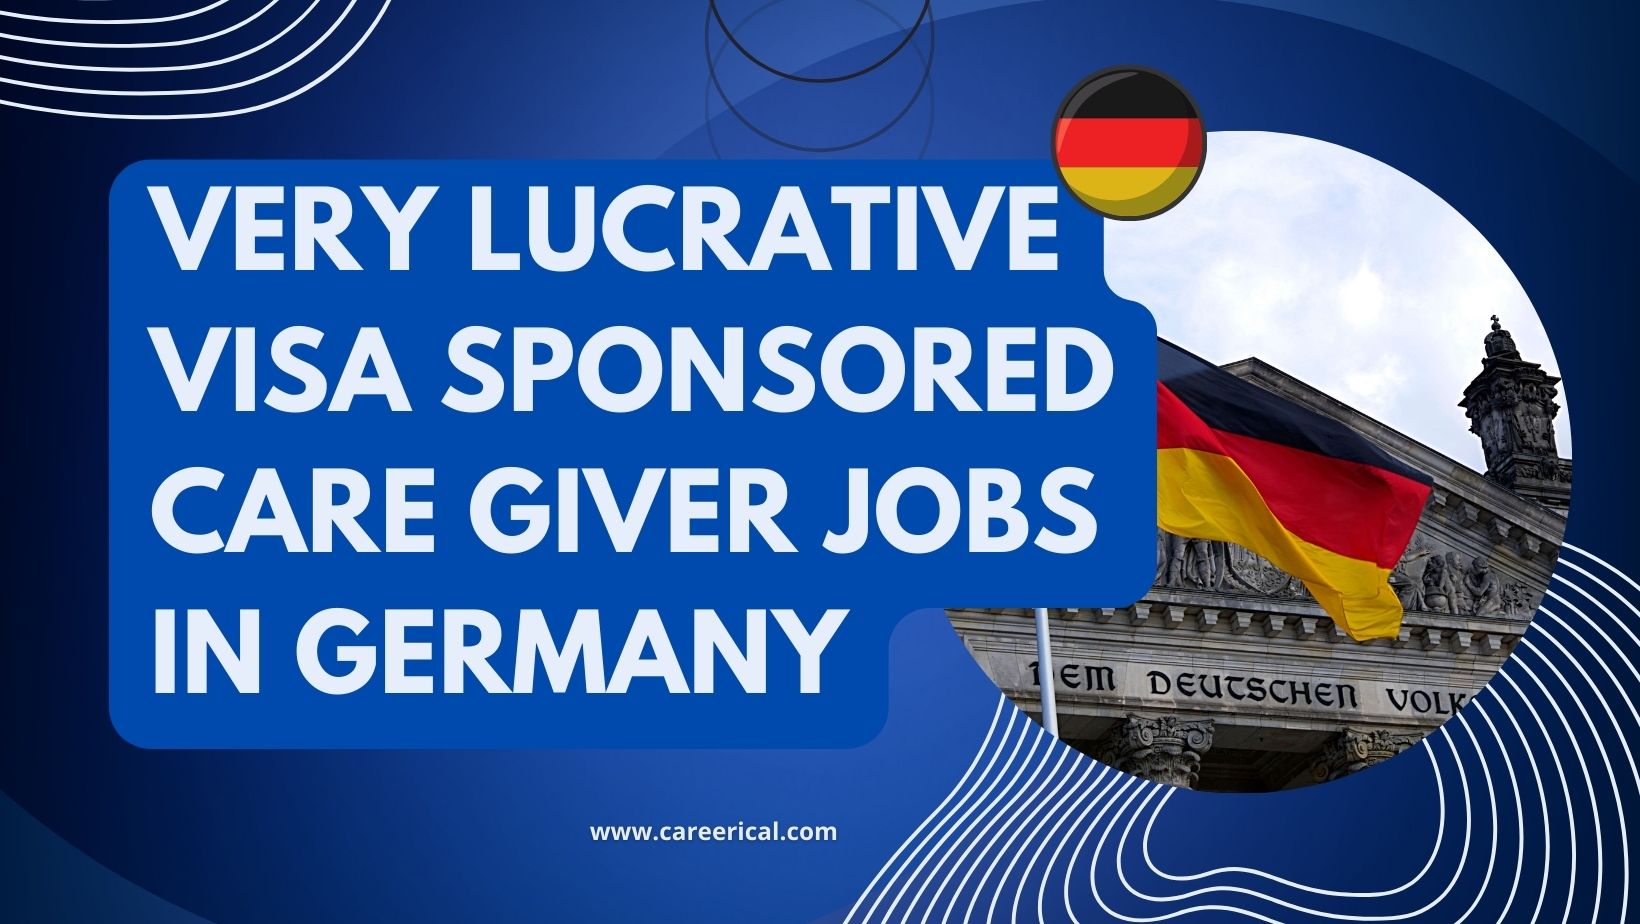 Very Lucrative and Visa Sponsored Care Giver Jobs in Germany